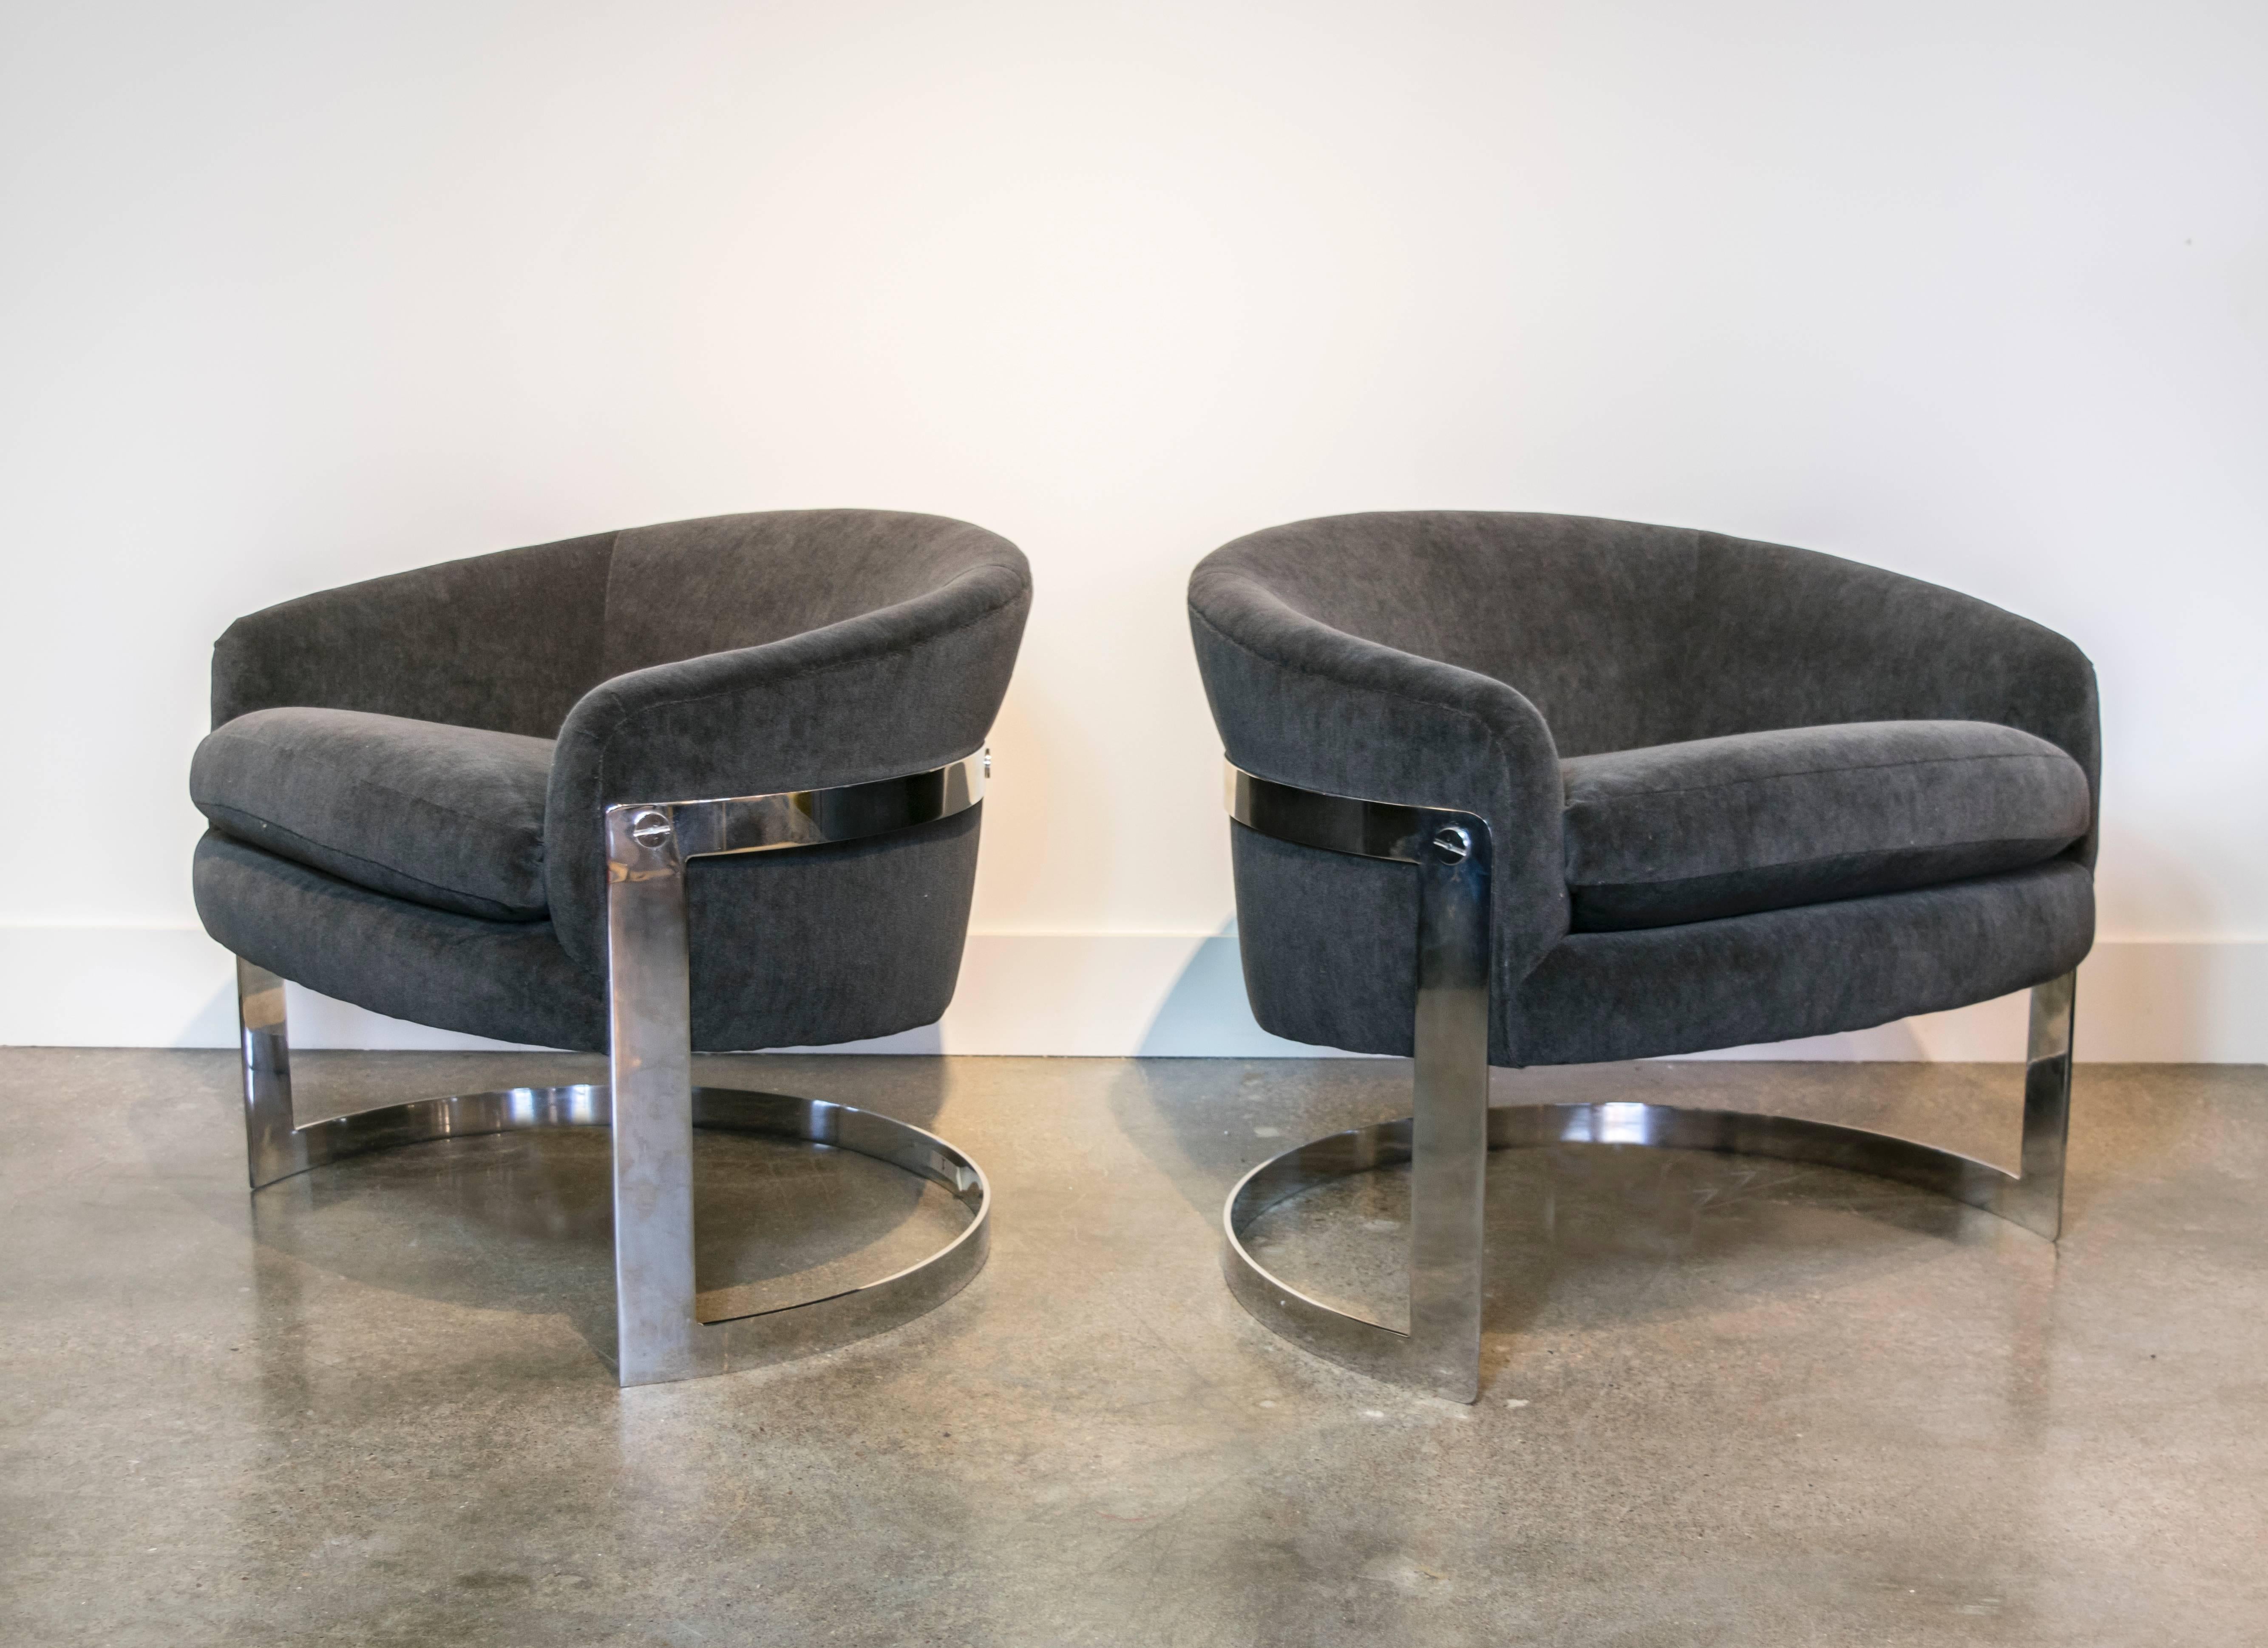 Elegant Milo Baughman cantilevered chrome chairs with gorgeous charcoal gray mohair fabric and curved back seating.